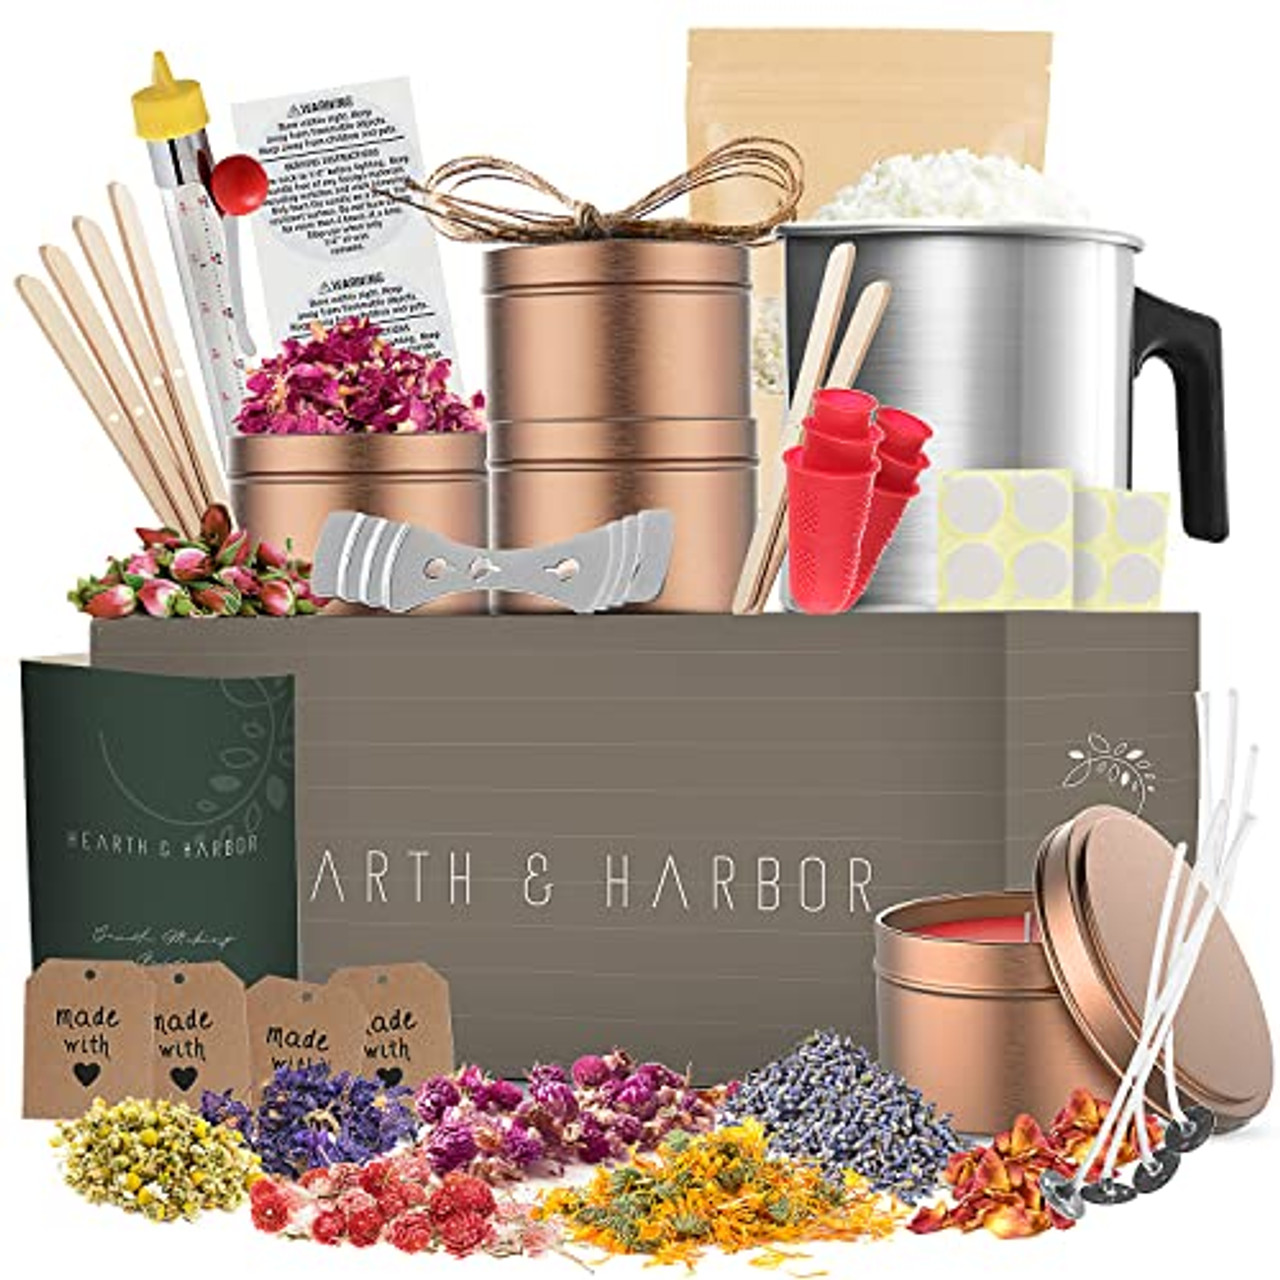 Hearth & Harbor Complete DIY Candle Making Kit, 10lbs. Soy Wax